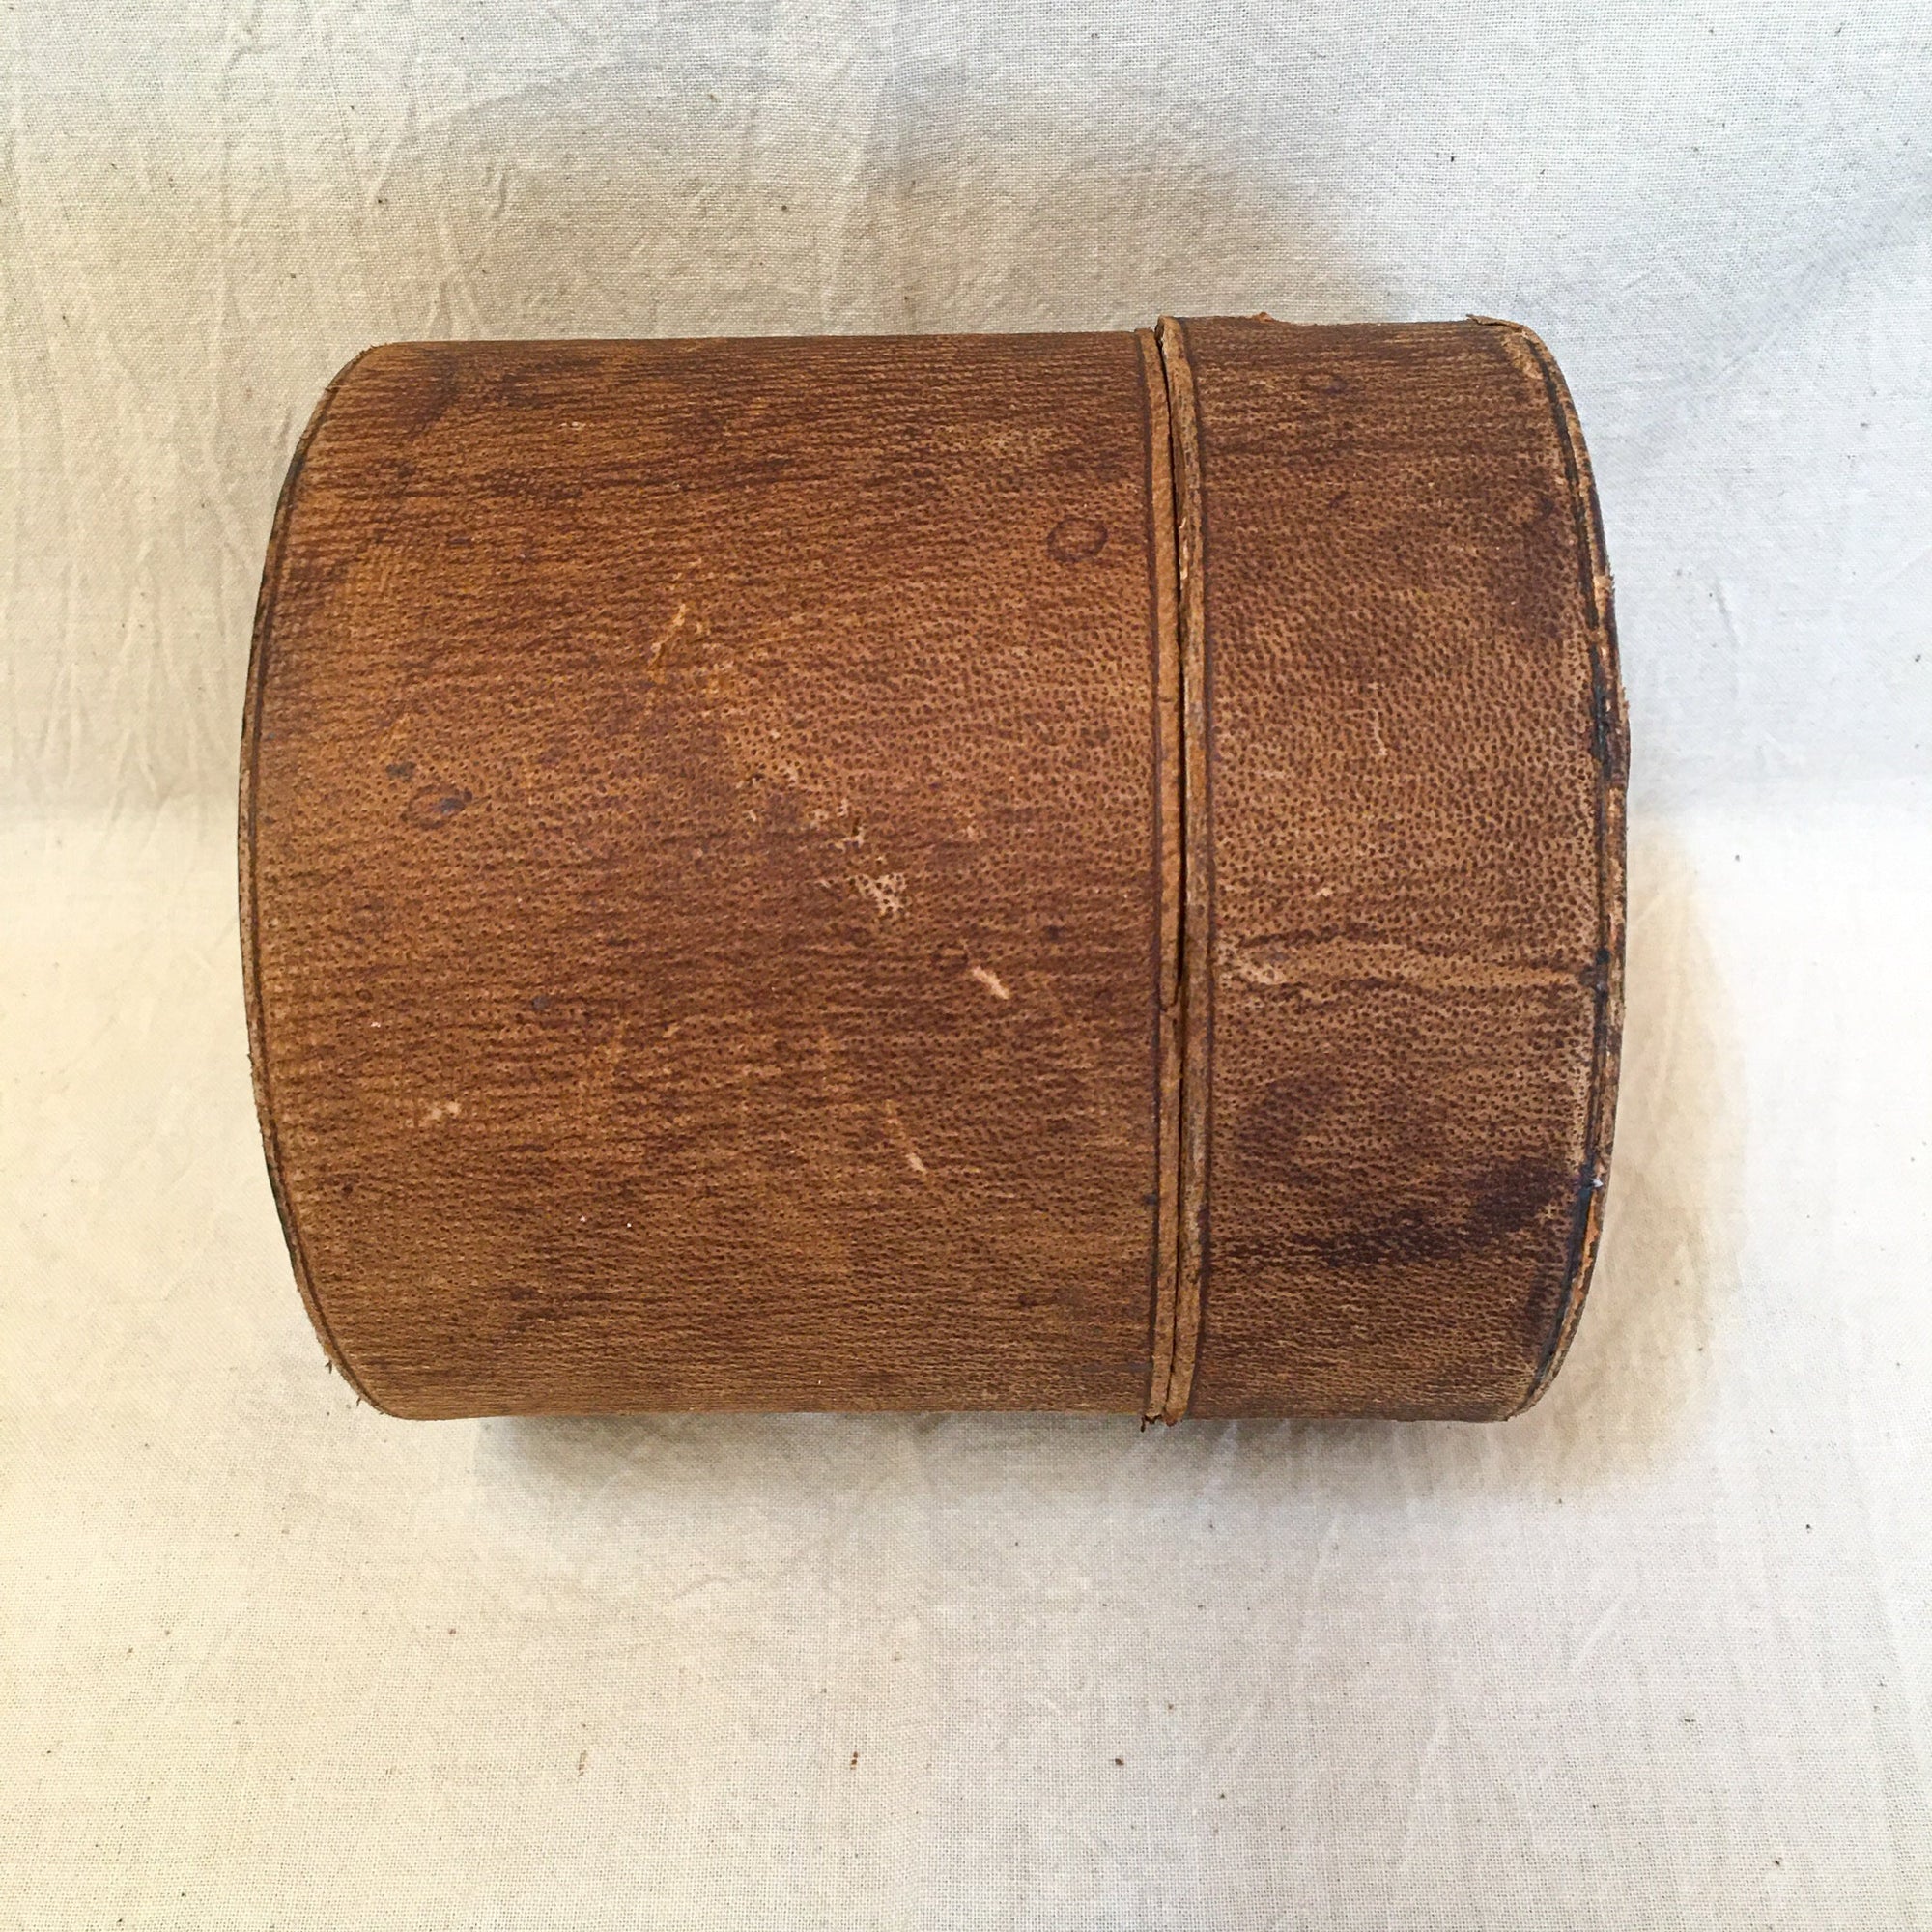 Late 1800’s – Early 1900’s Leather Collar Box with Dog Decoration